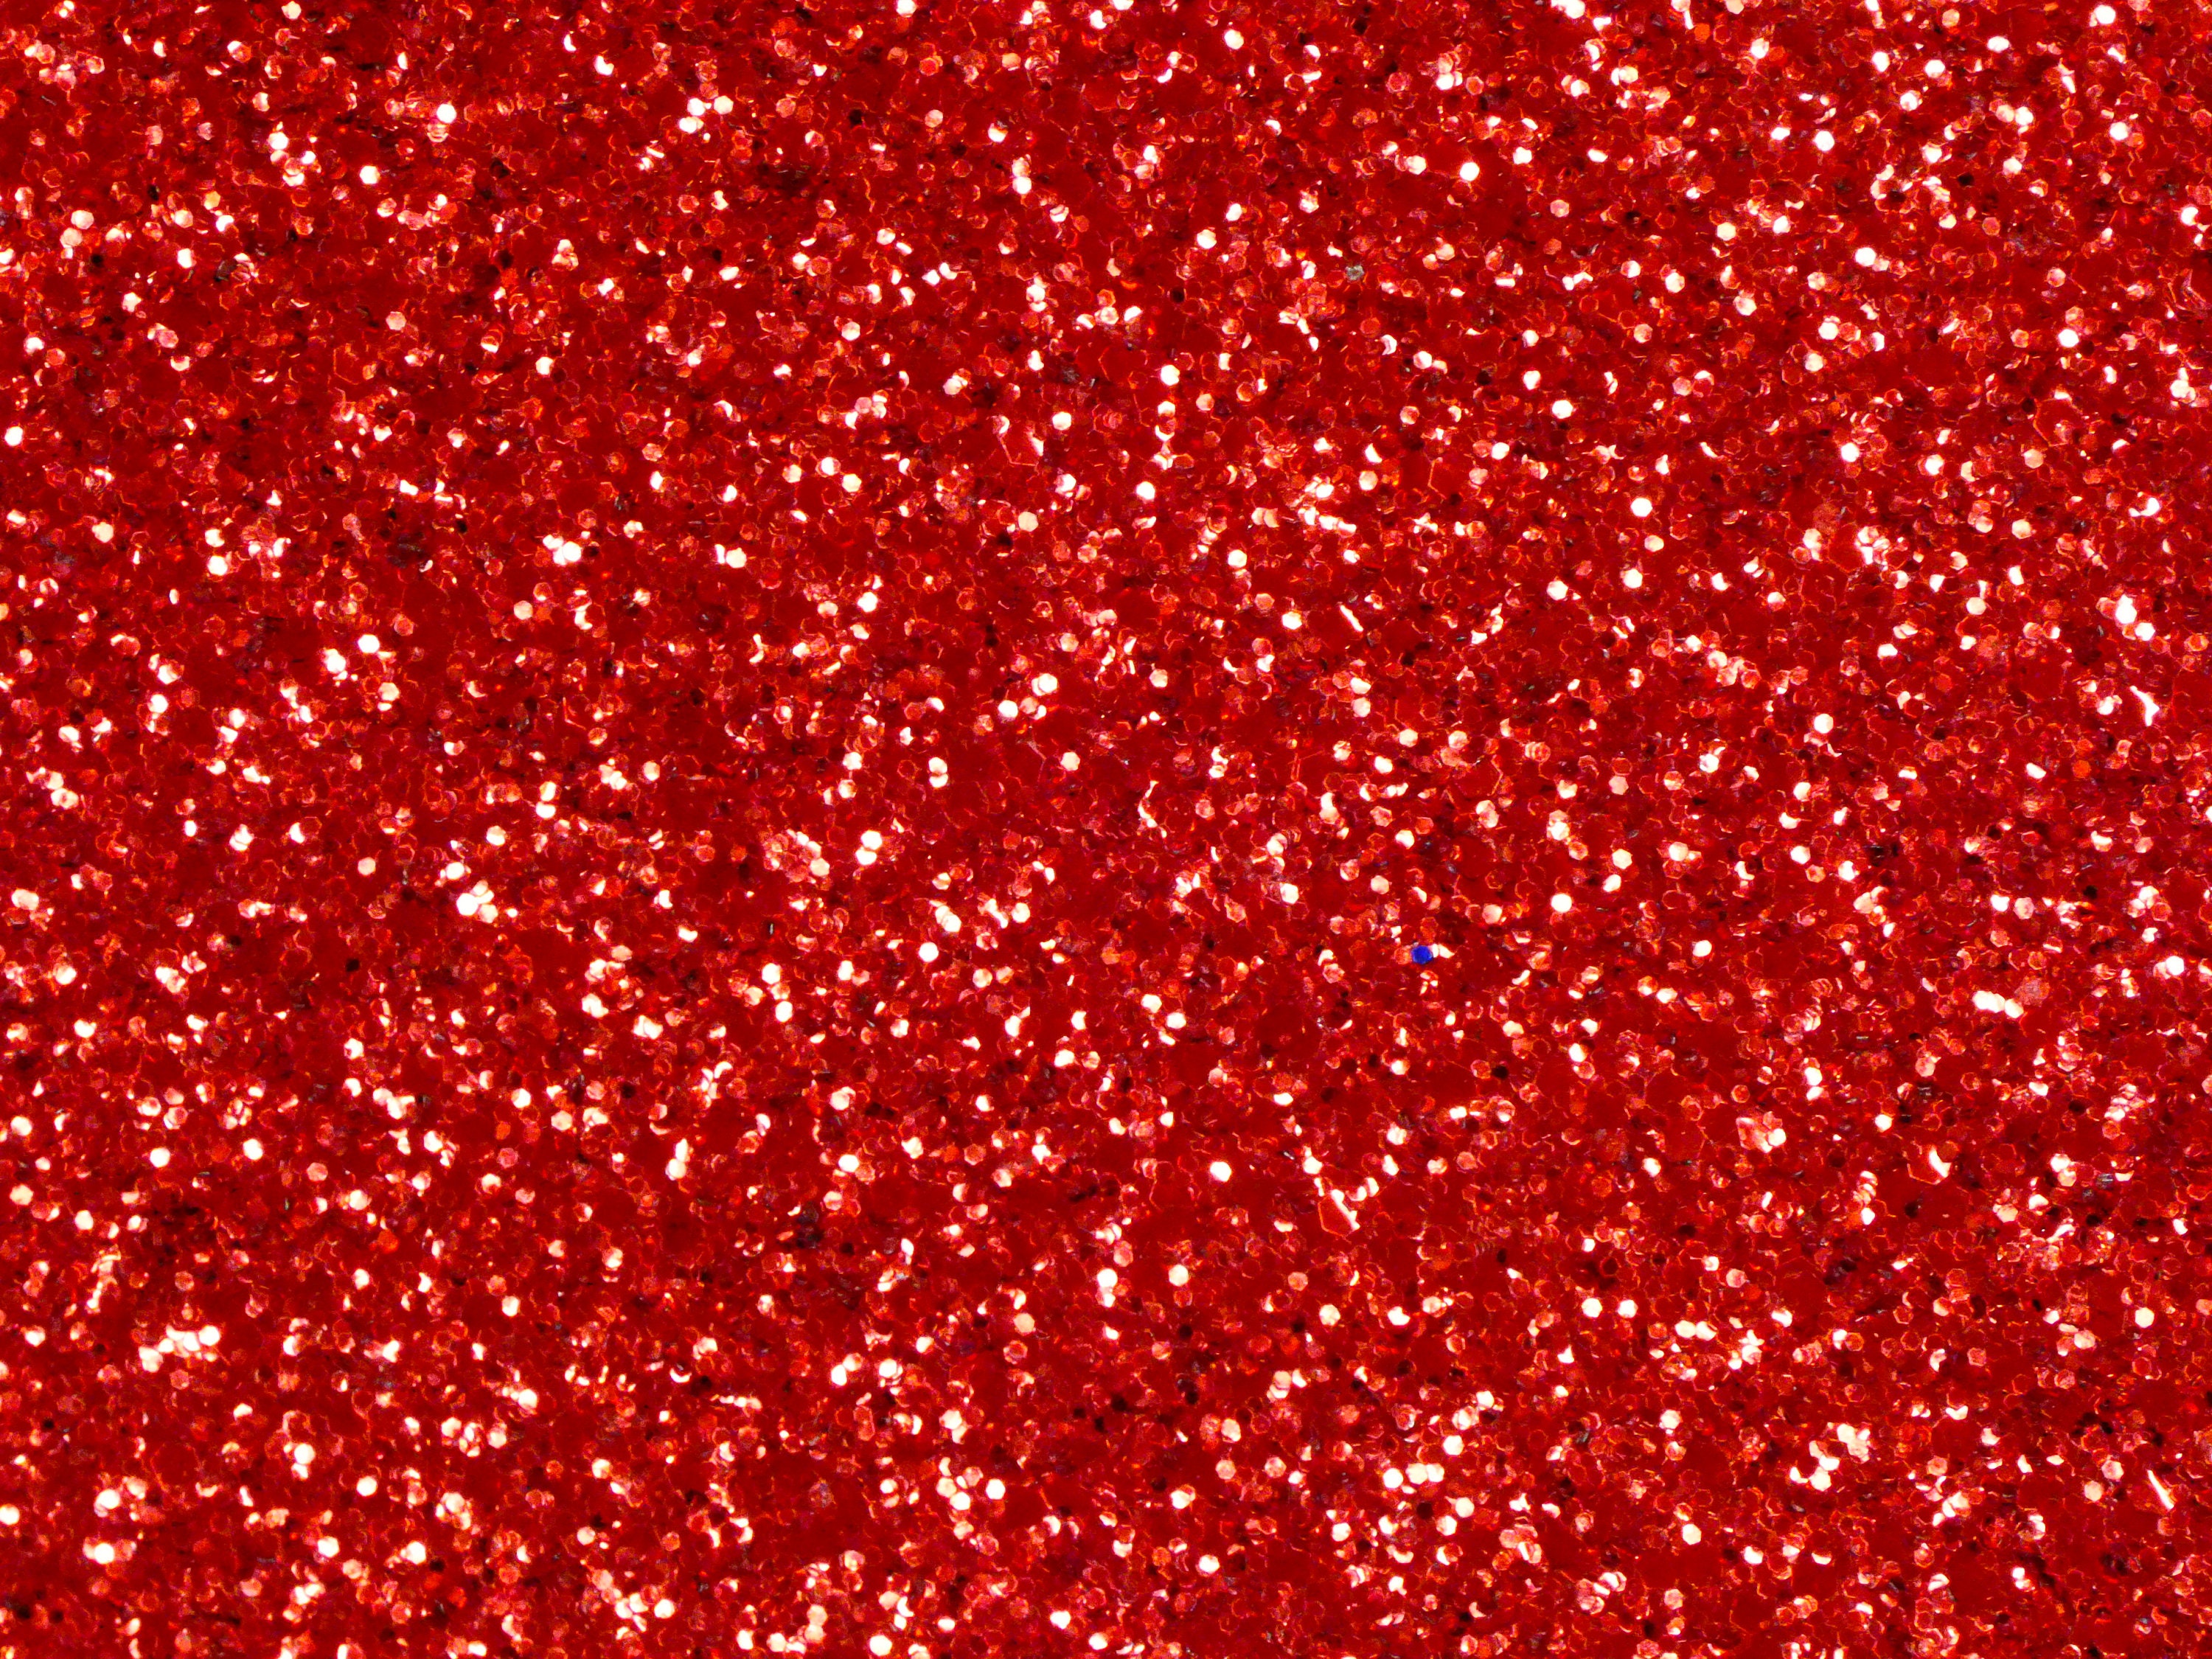 Chunky Glitter 5x11 RED Metallic Fabric applied to Leather 4 firmness  3.5-4oz/1.4-1.6mm PeggySueAlso® E4355-08